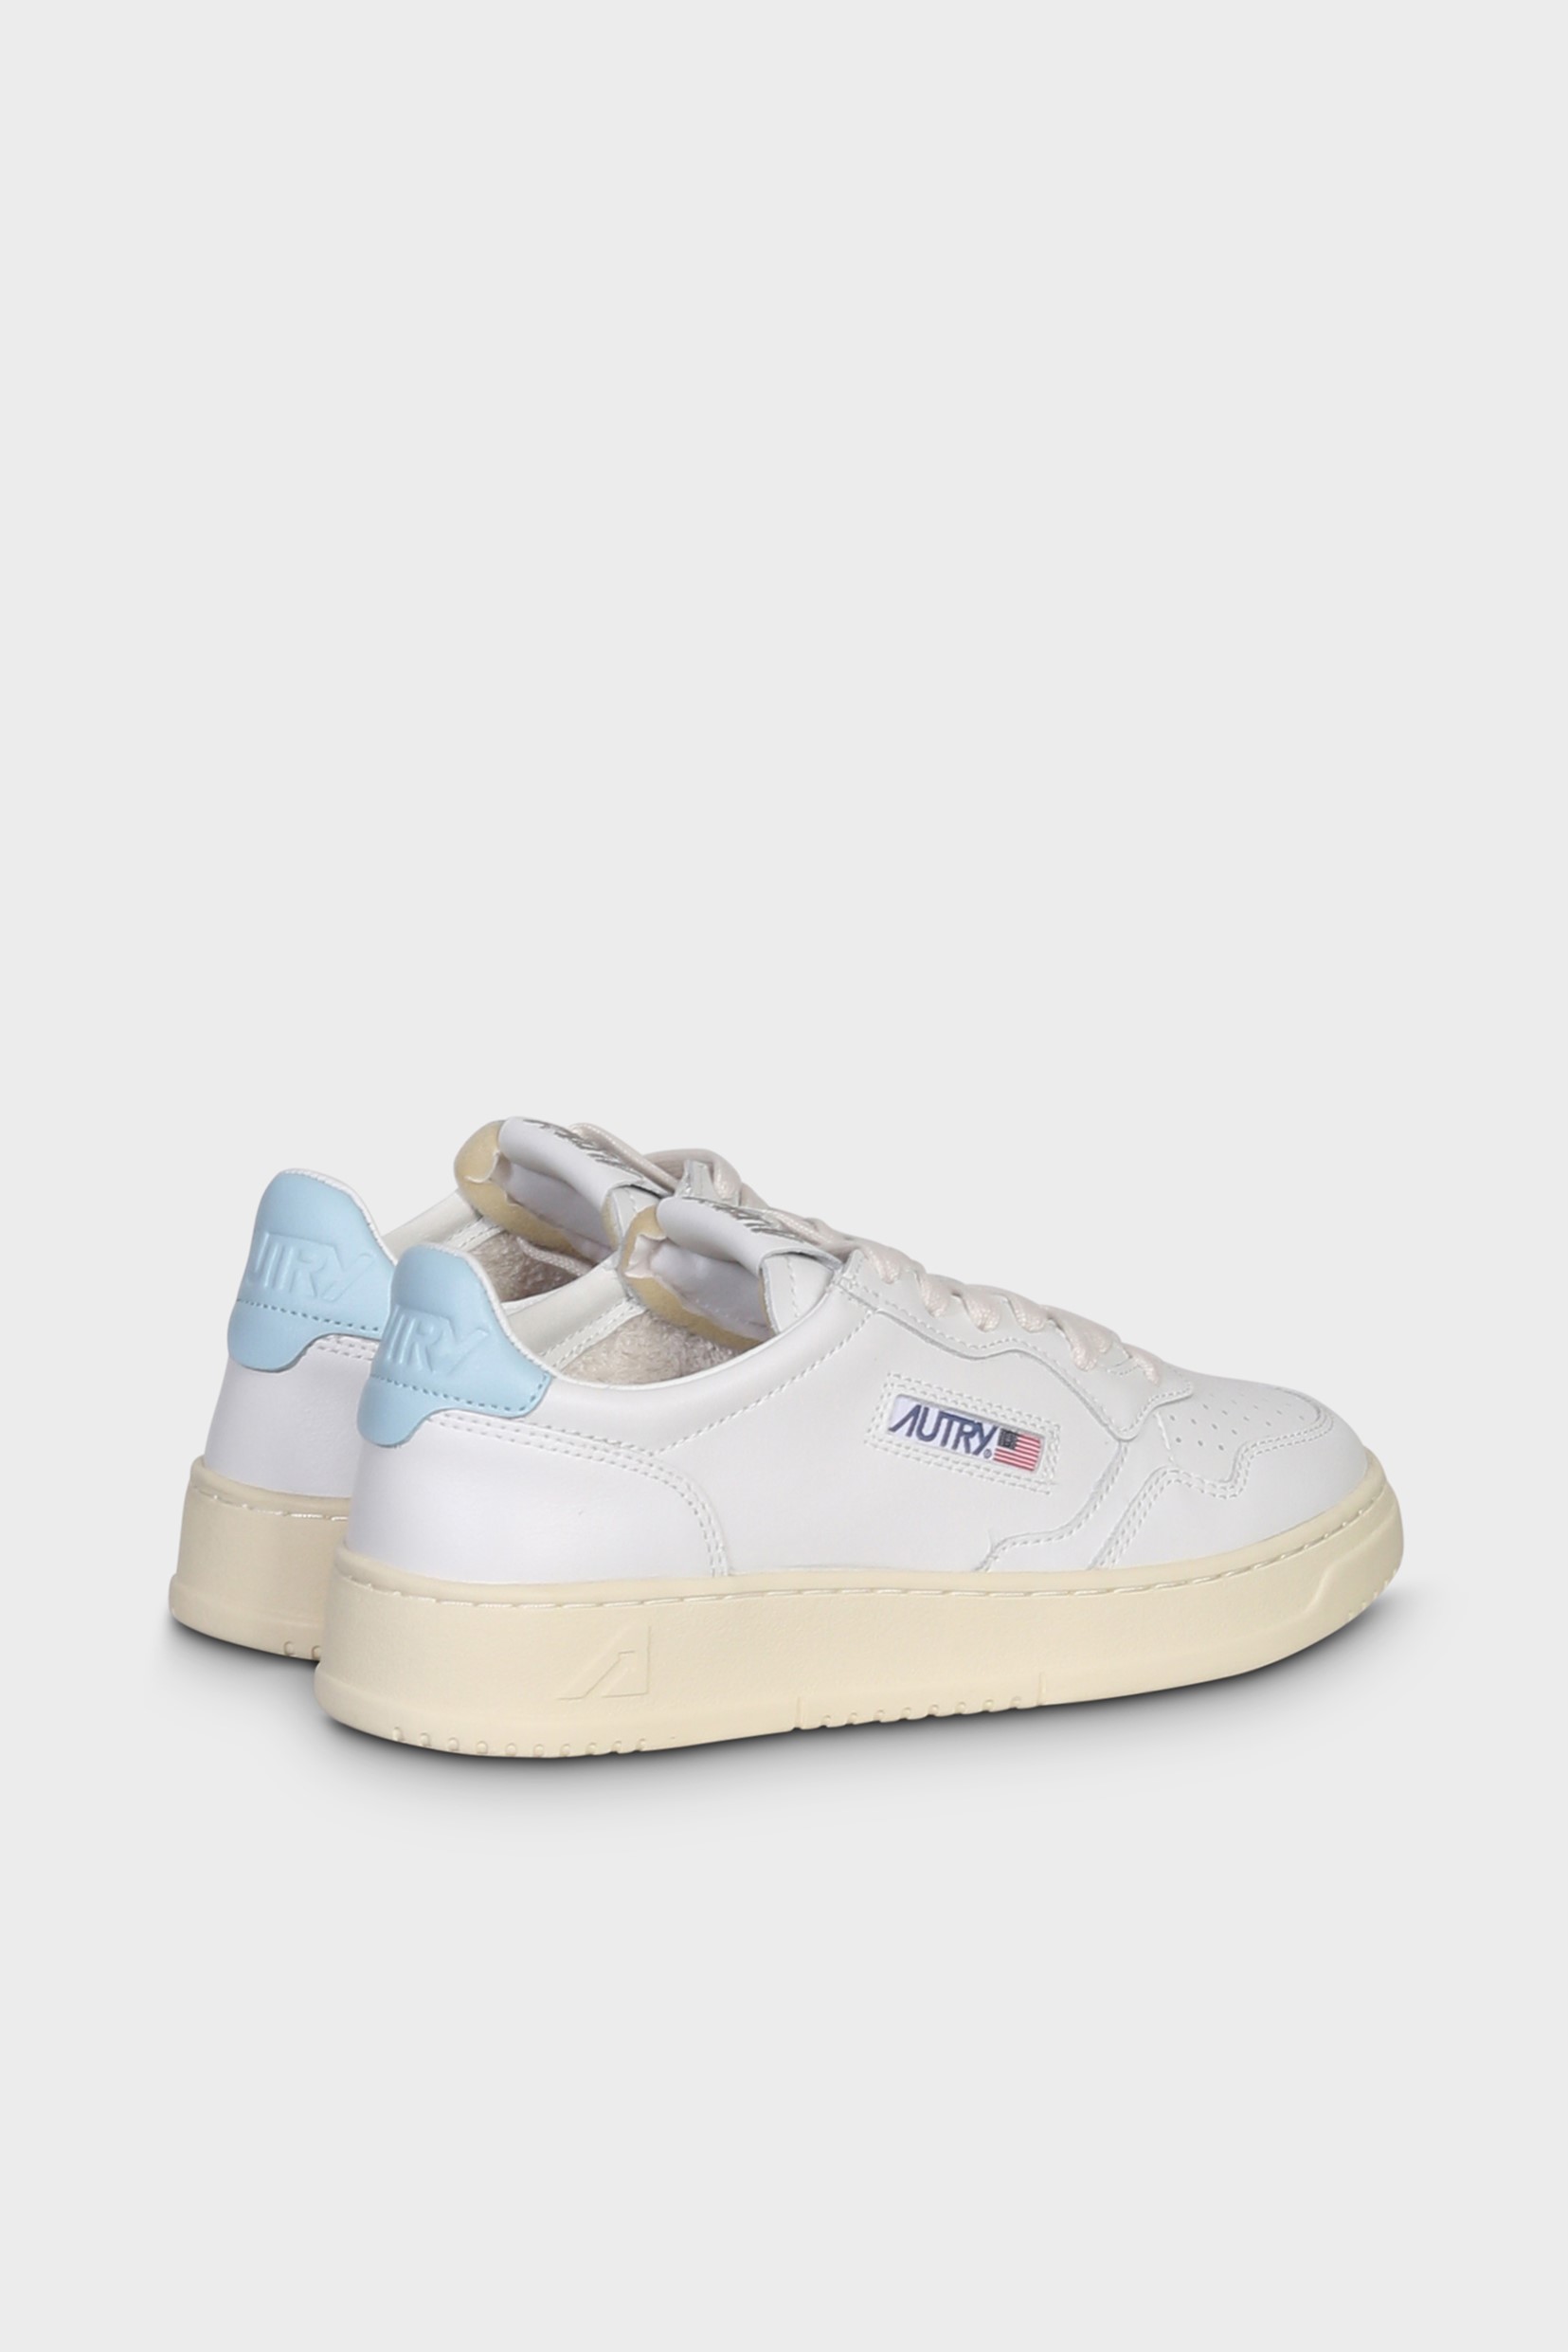 AUTRY ACTION SHOES Sneaker Low in White/Stream Blue 35